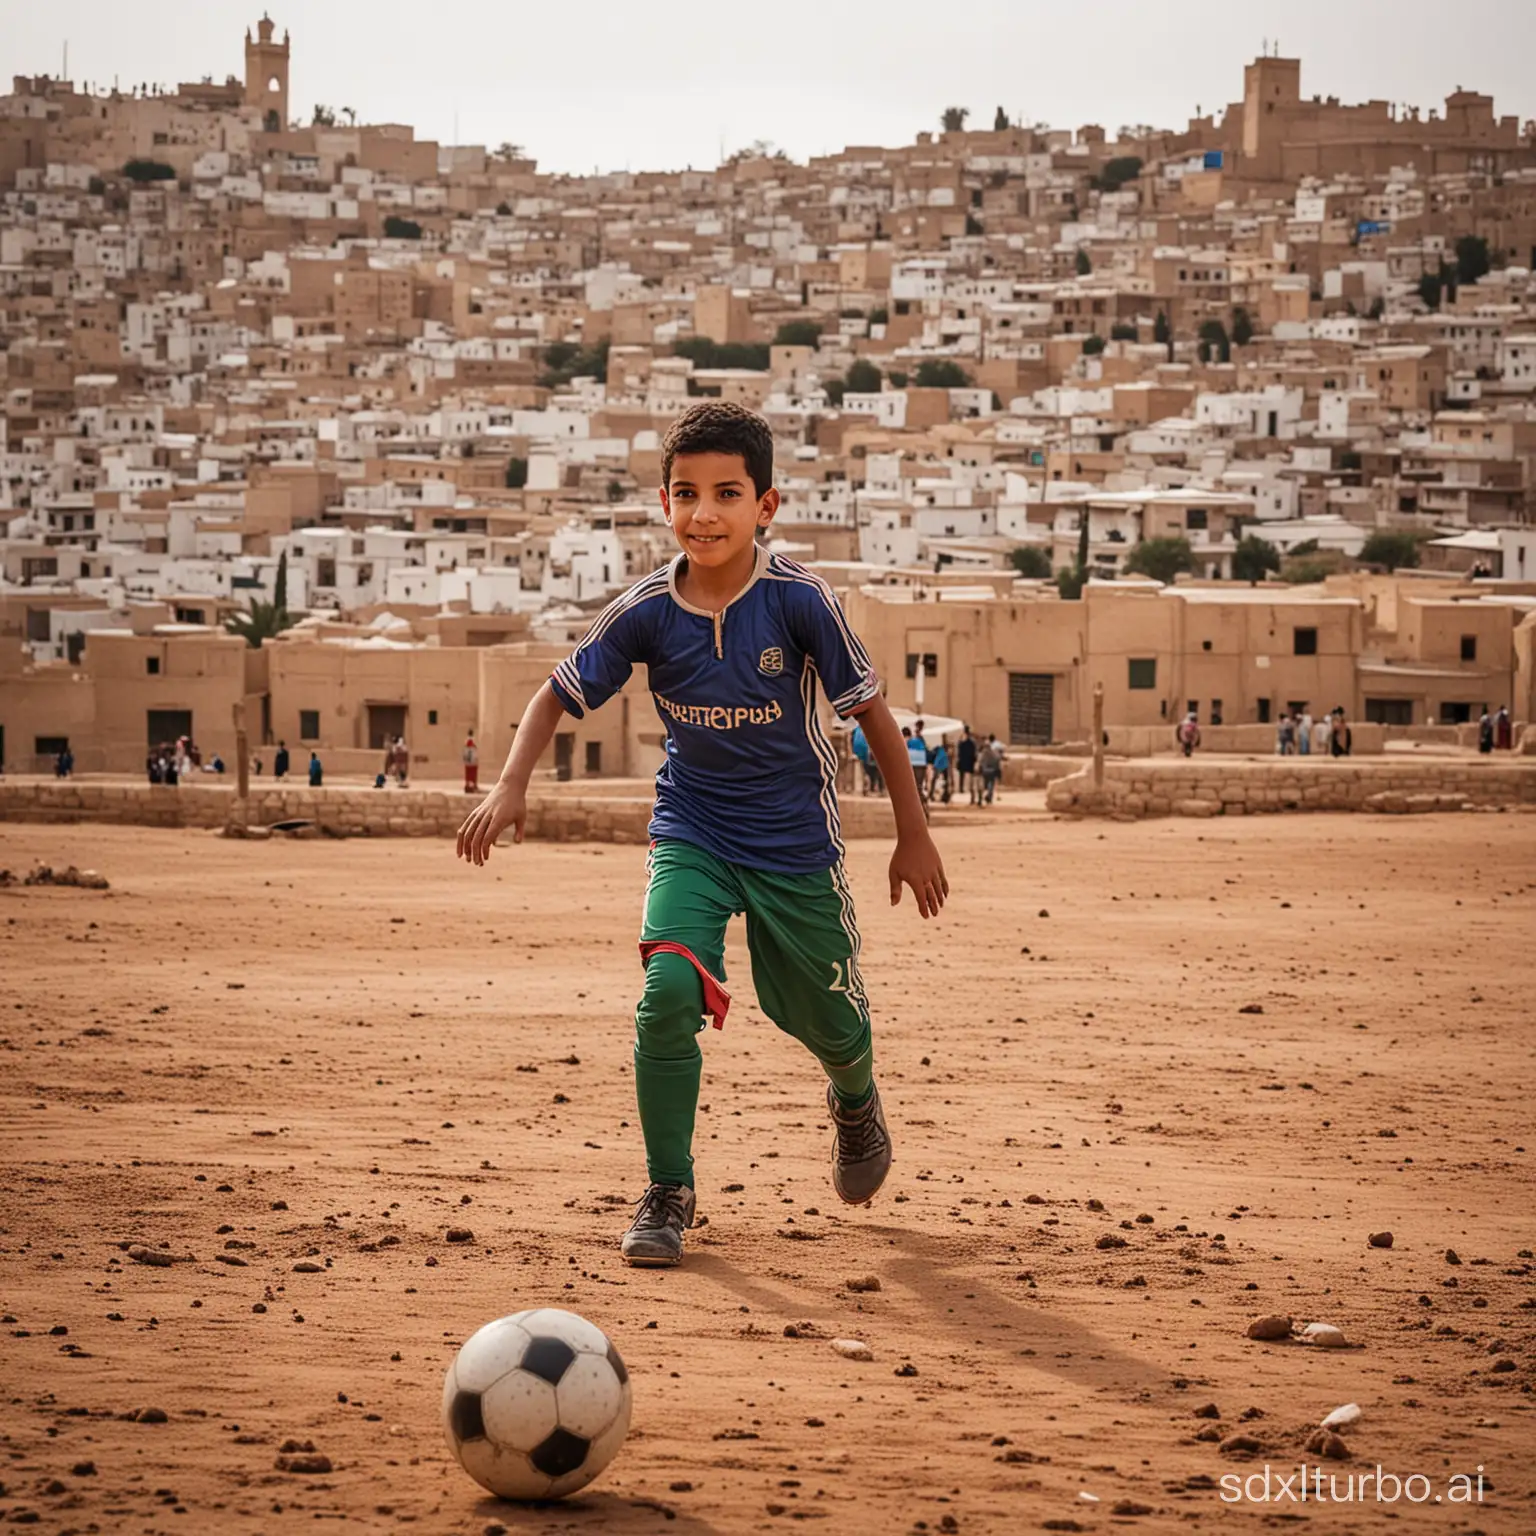 Moroccan-Kid-Playing-Football-in-Traditional-Fez-Headwear